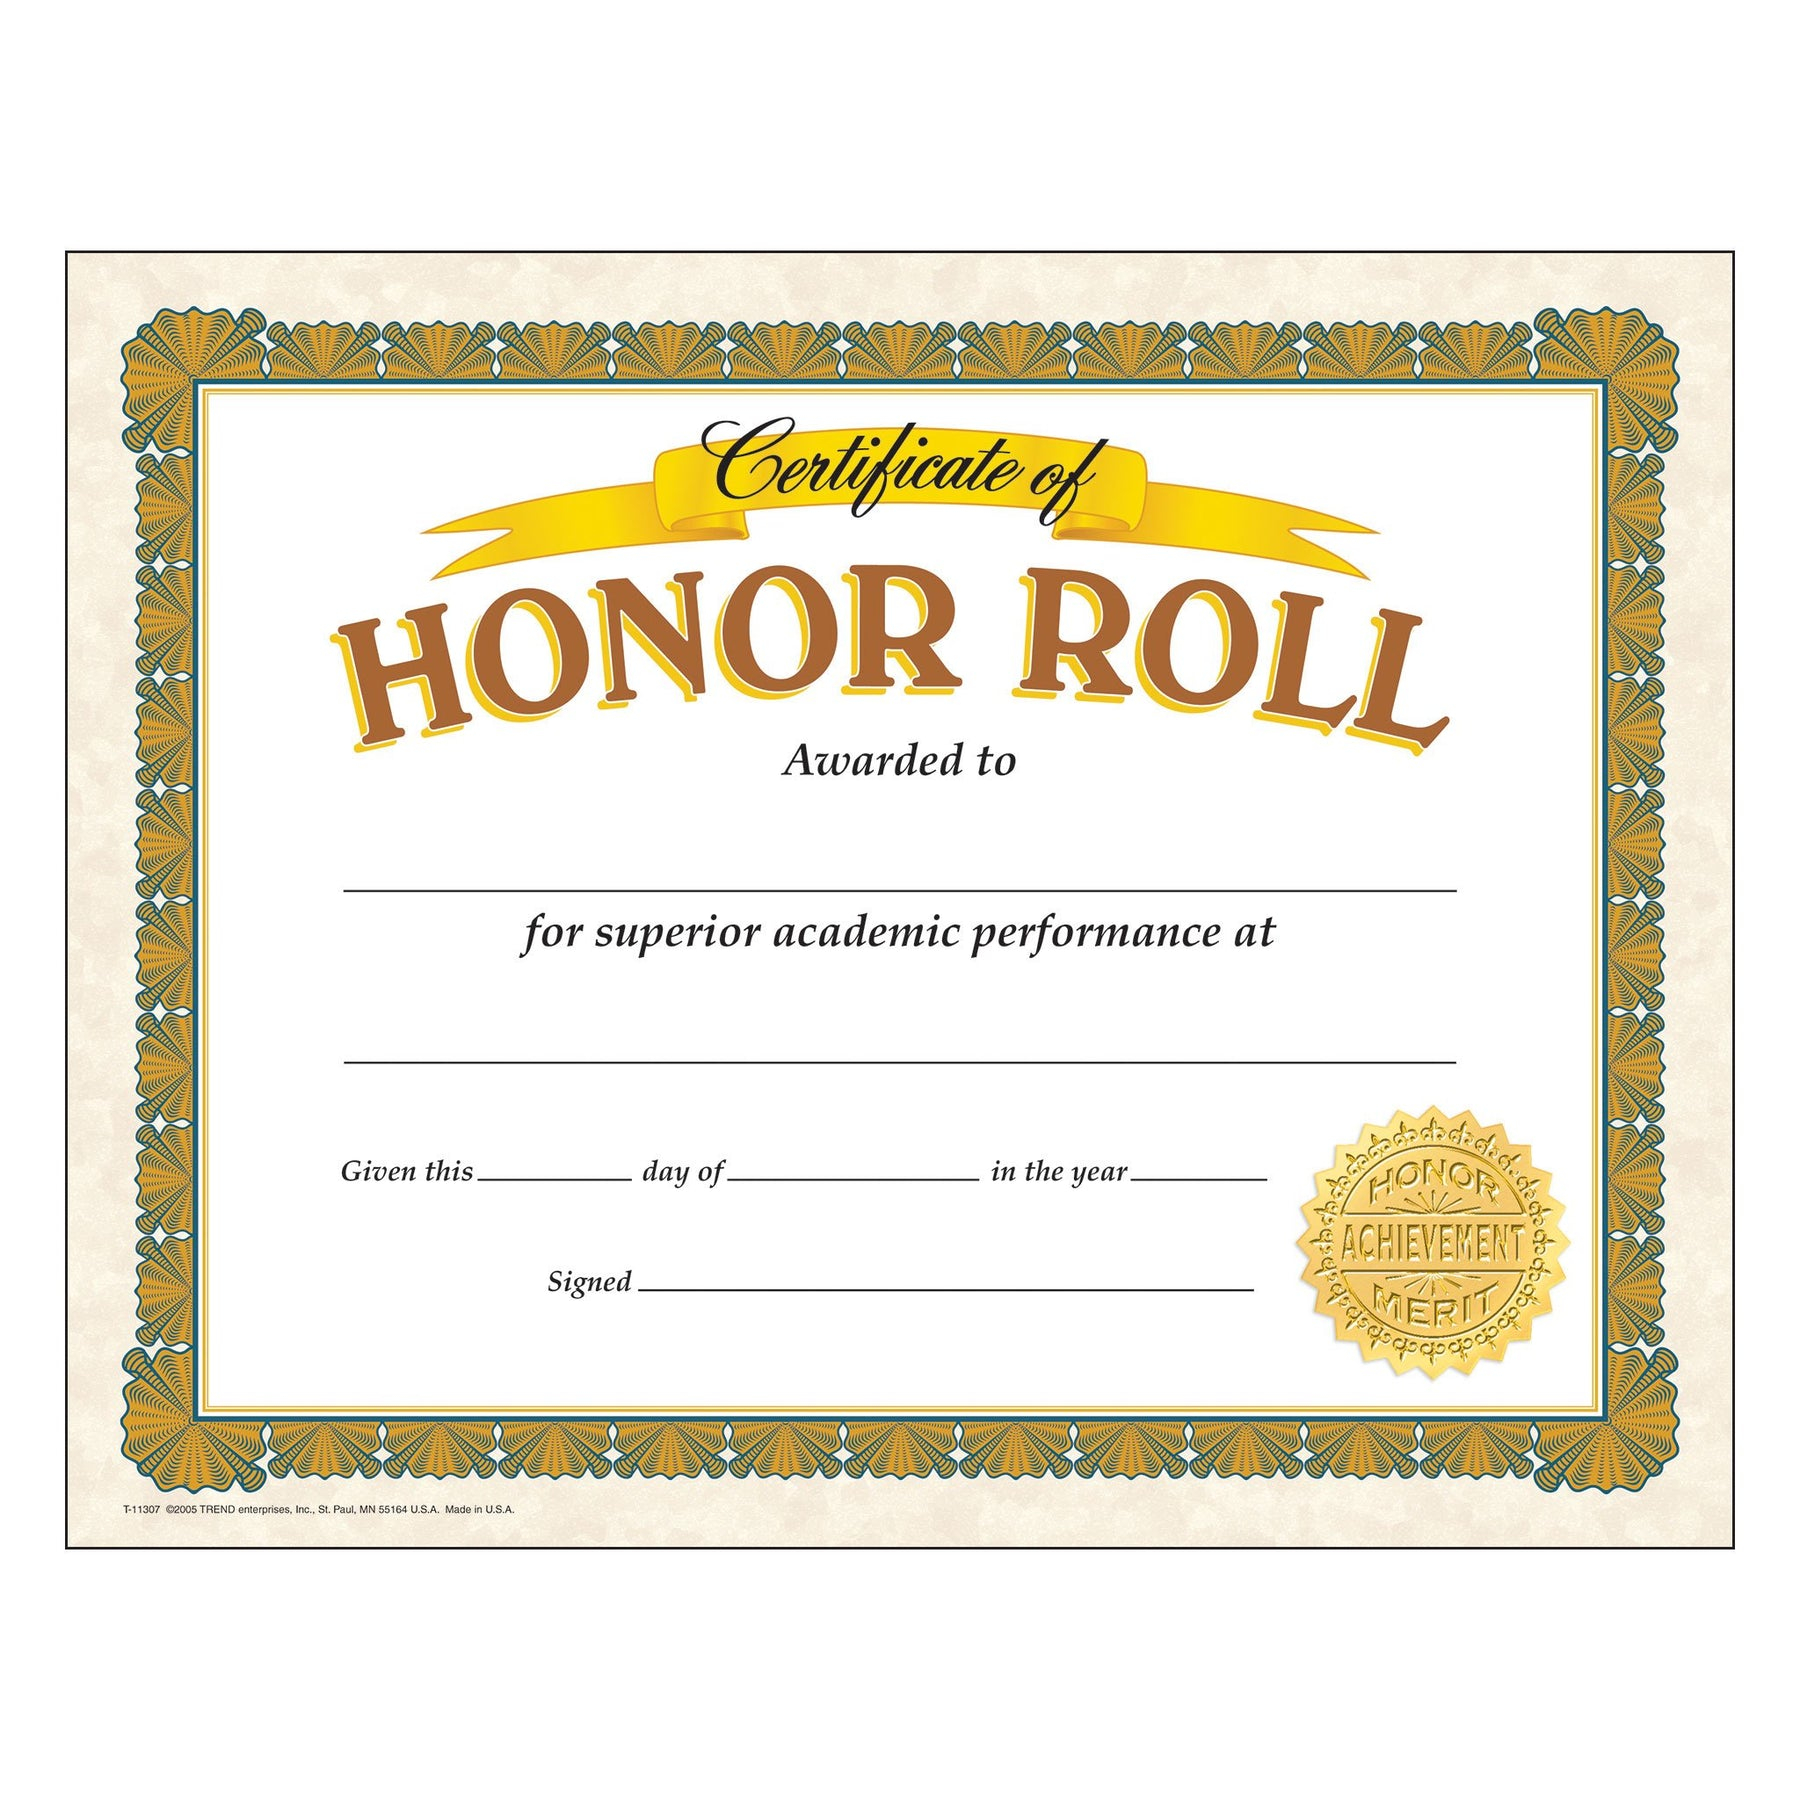 Honor Roll Classic Certificates With Regard To Honor Roll Certificate Template